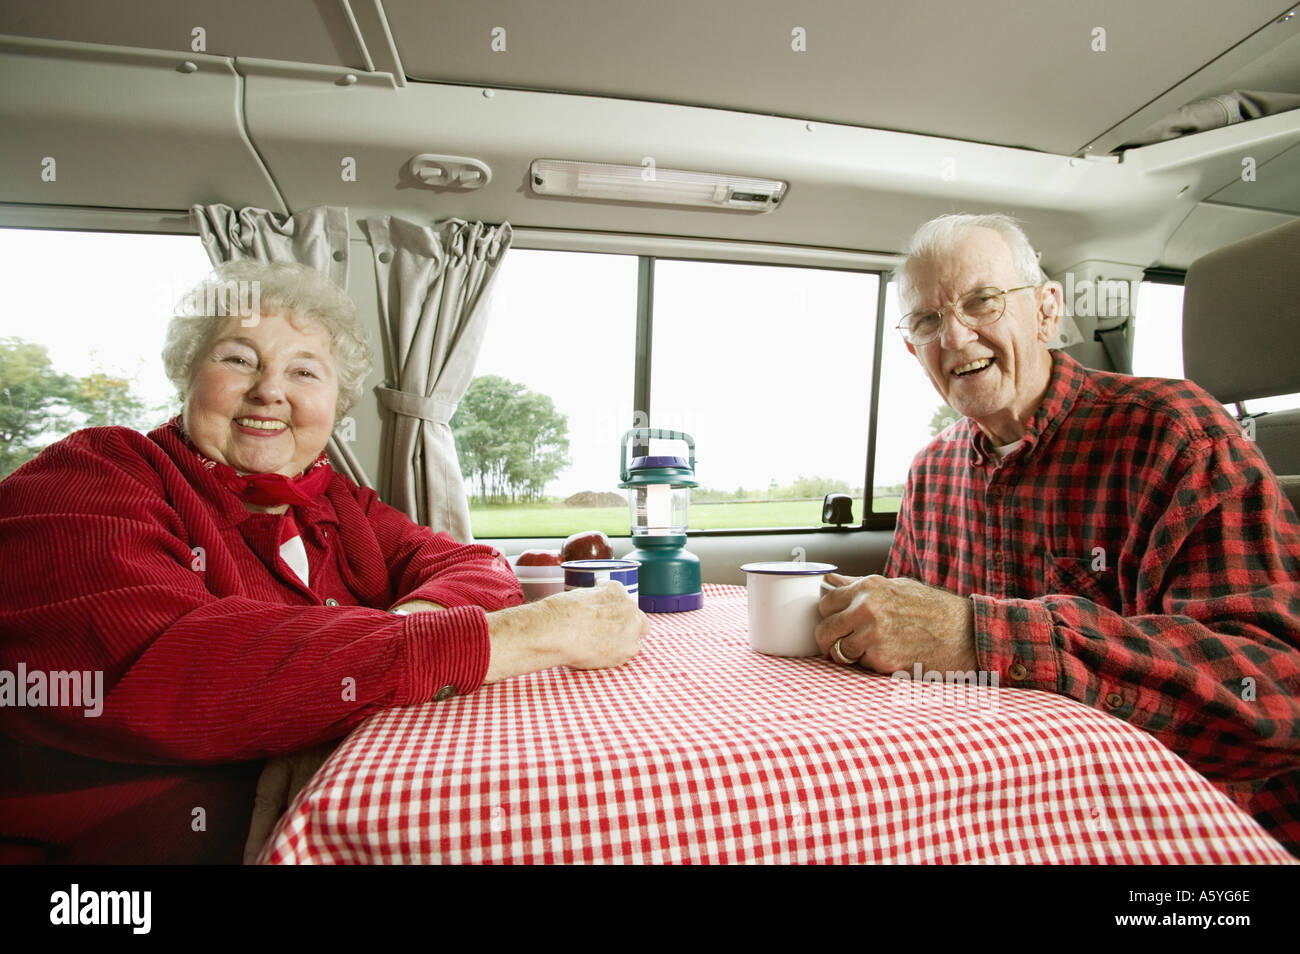 Senior couple sitting together in their van Stock Photo